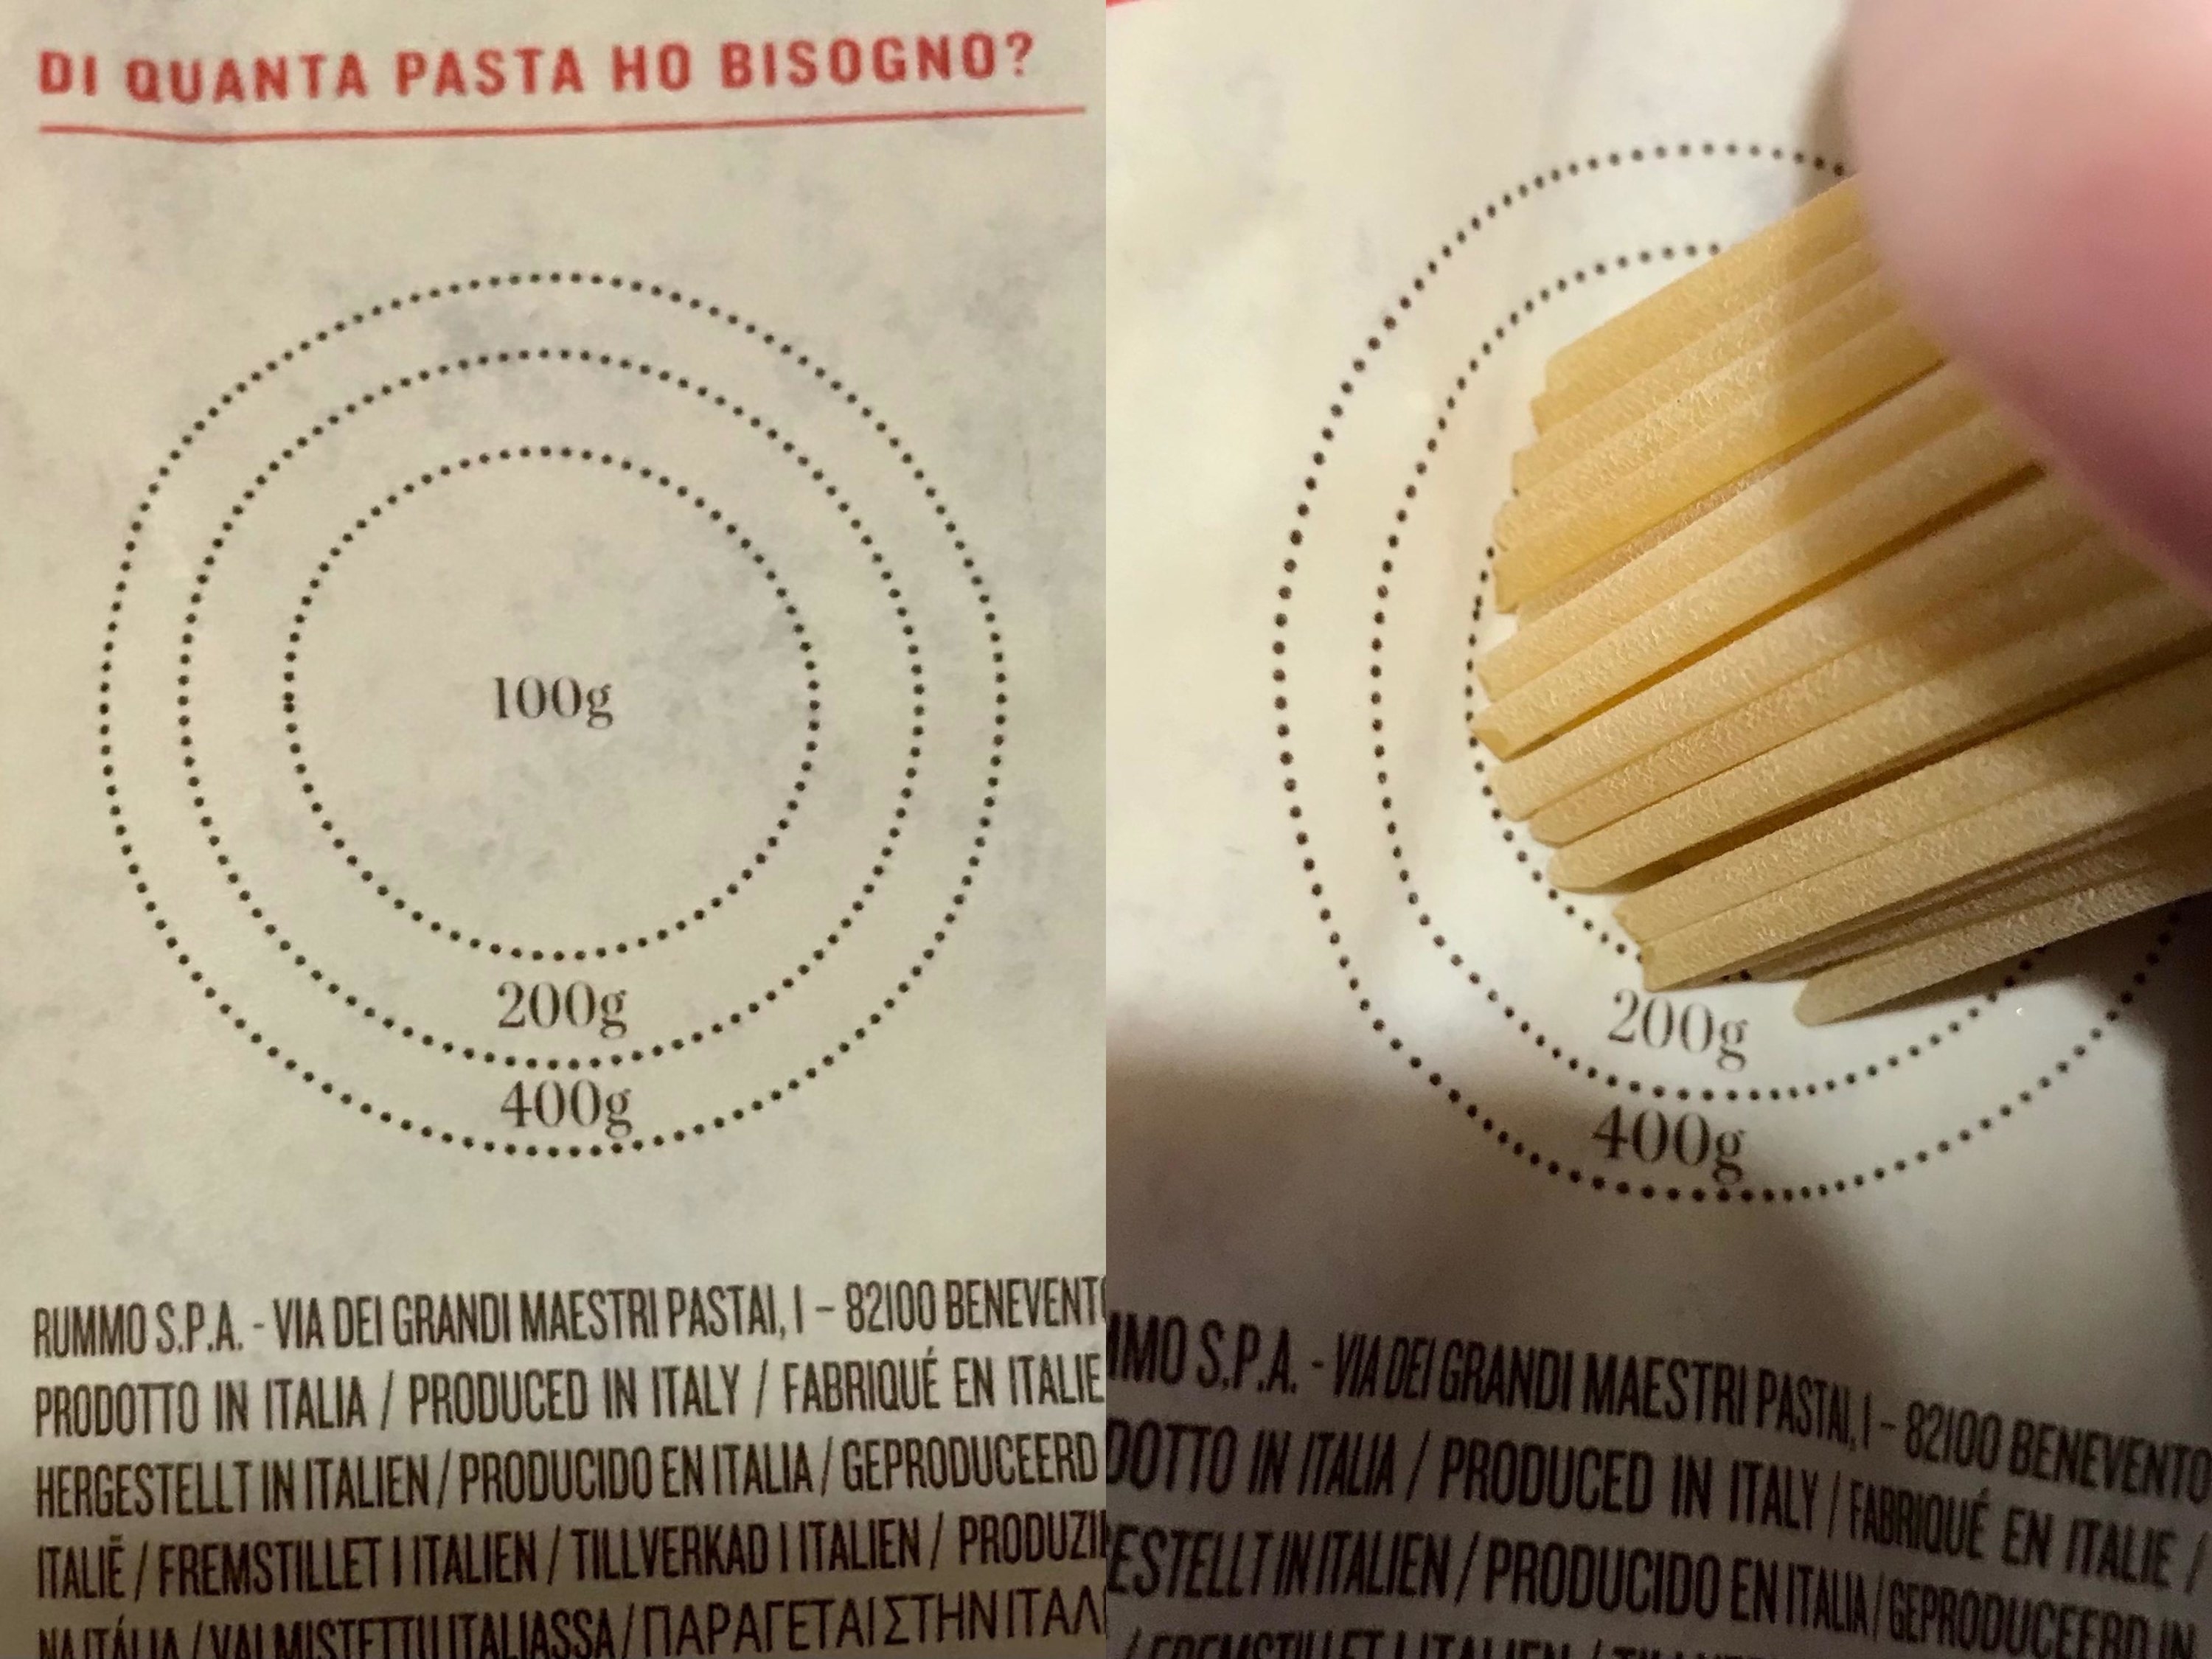 A drawing for measuring pasta